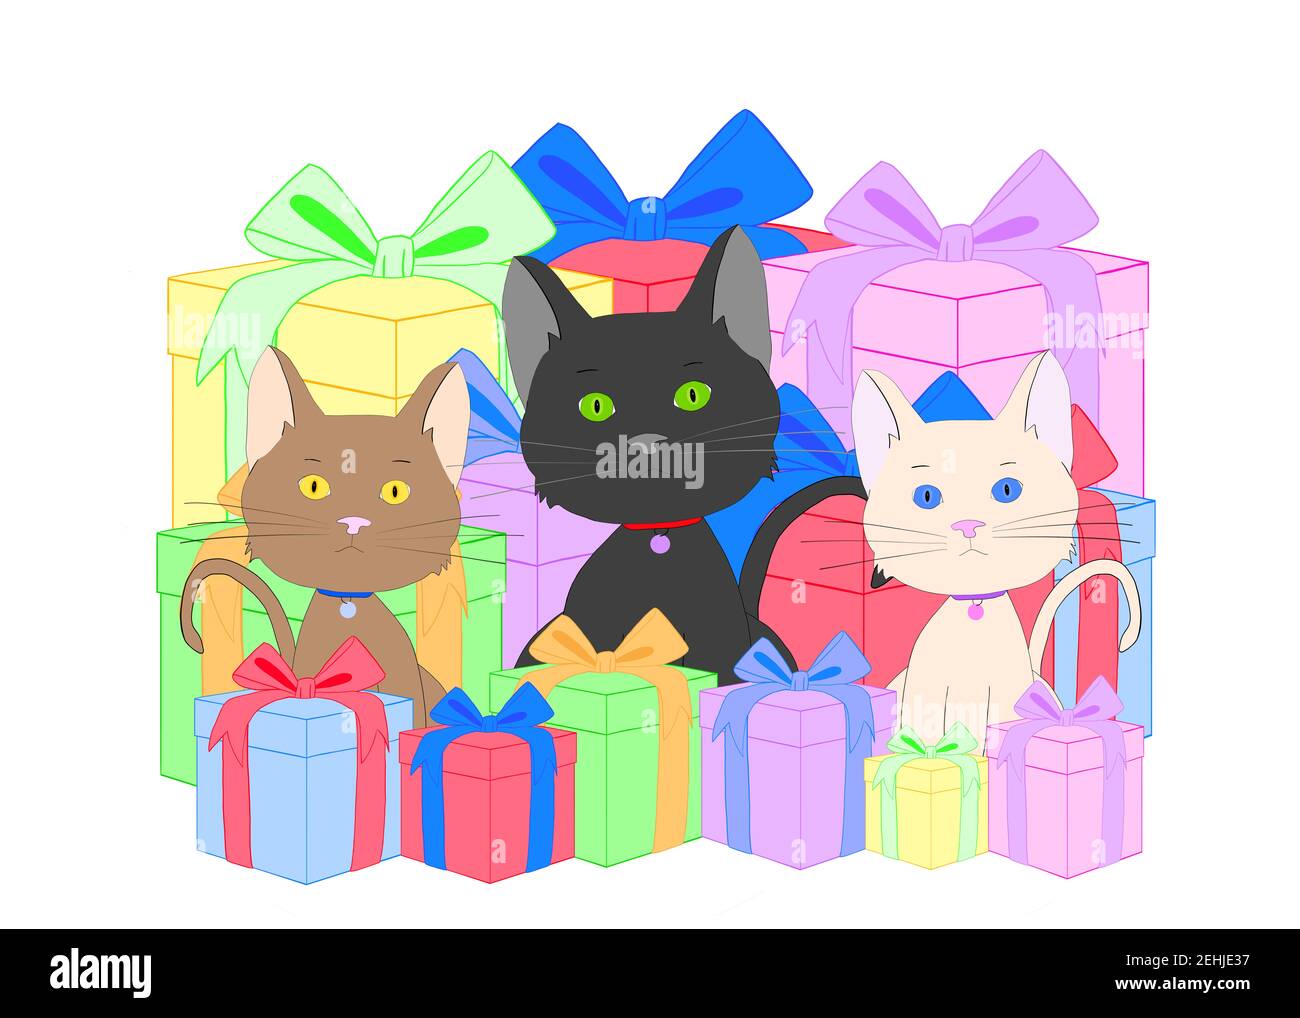 Illustration drawing of three diverse tabby kittens sitting behind and in front of colorful present boxes with bows on a pink background, looking dire Stock Photo